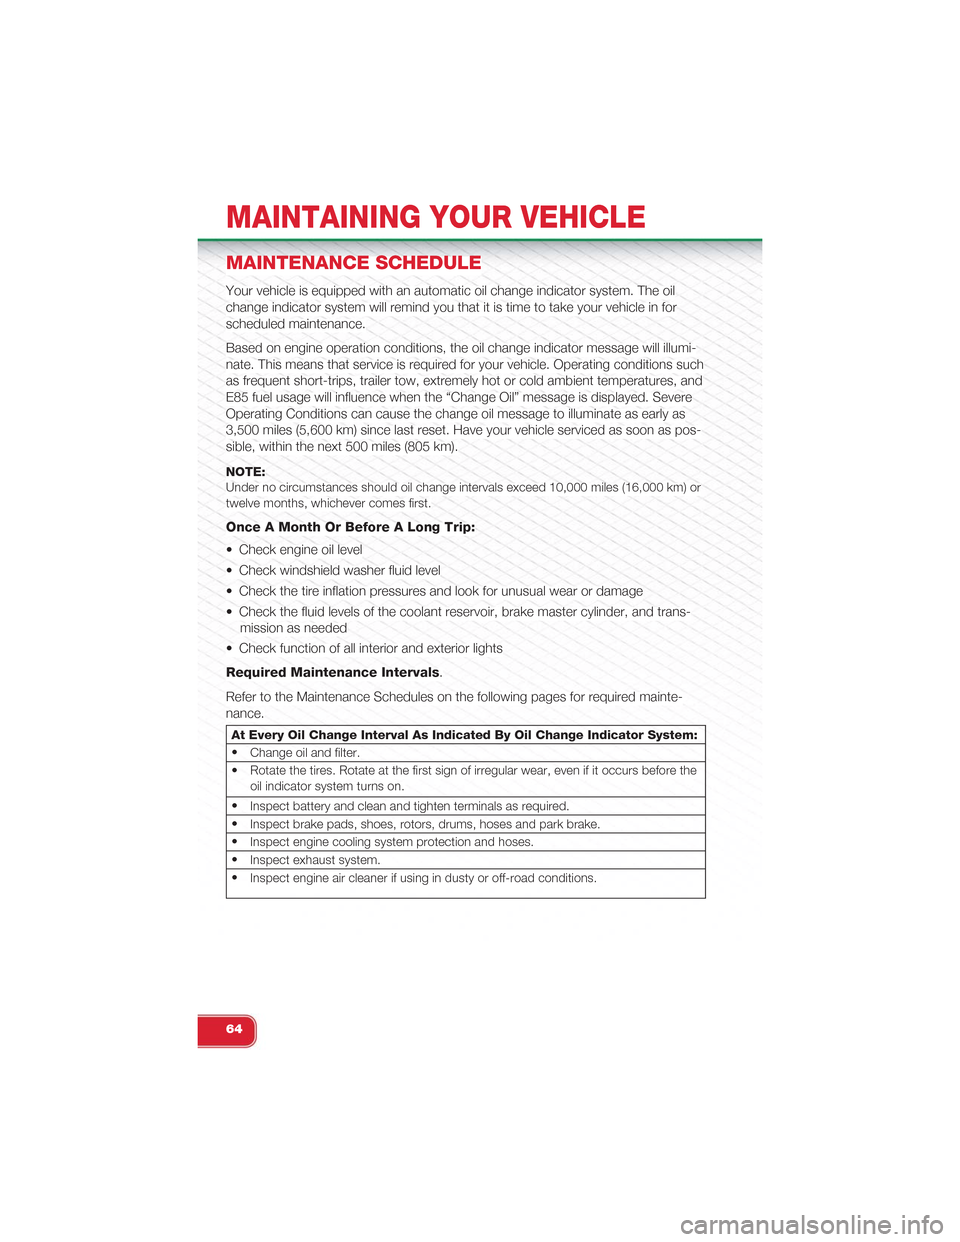 FIAT 500 ABARTH 2013 2.G User Guide MAINTENANCE SCHEDULE
Your vehicle is equipped with an automatic oil change indicator system. The oil
change indicator system will remind you that it is time to take your vehicle in for
scheduled maint